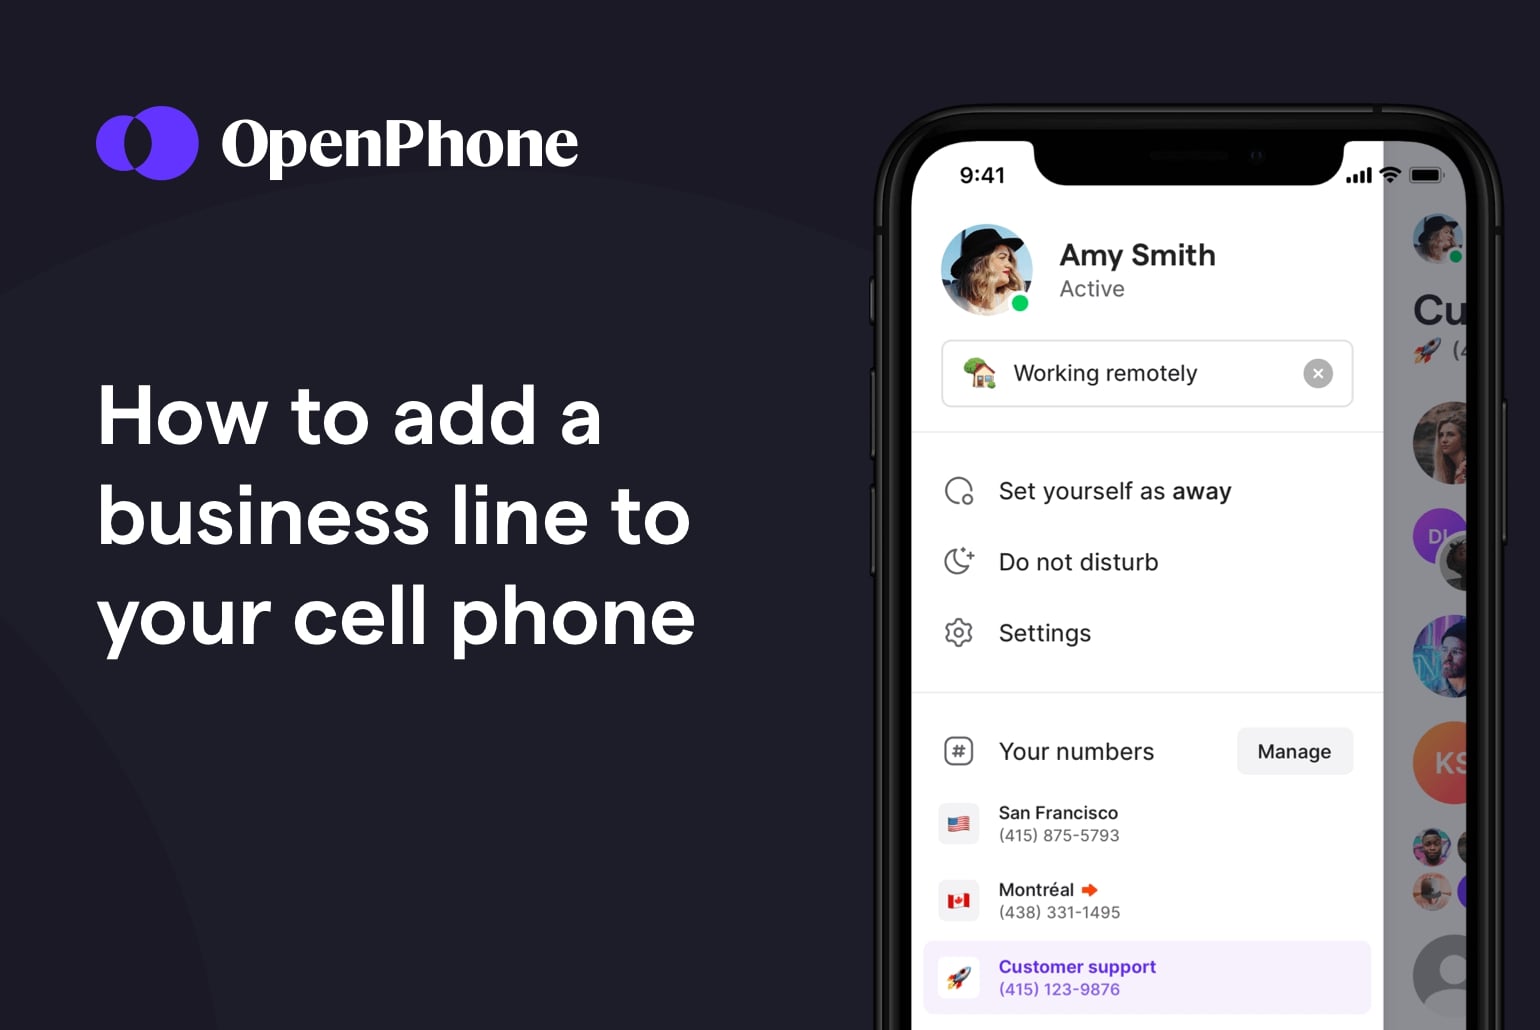 How to add a business line to your cell phone